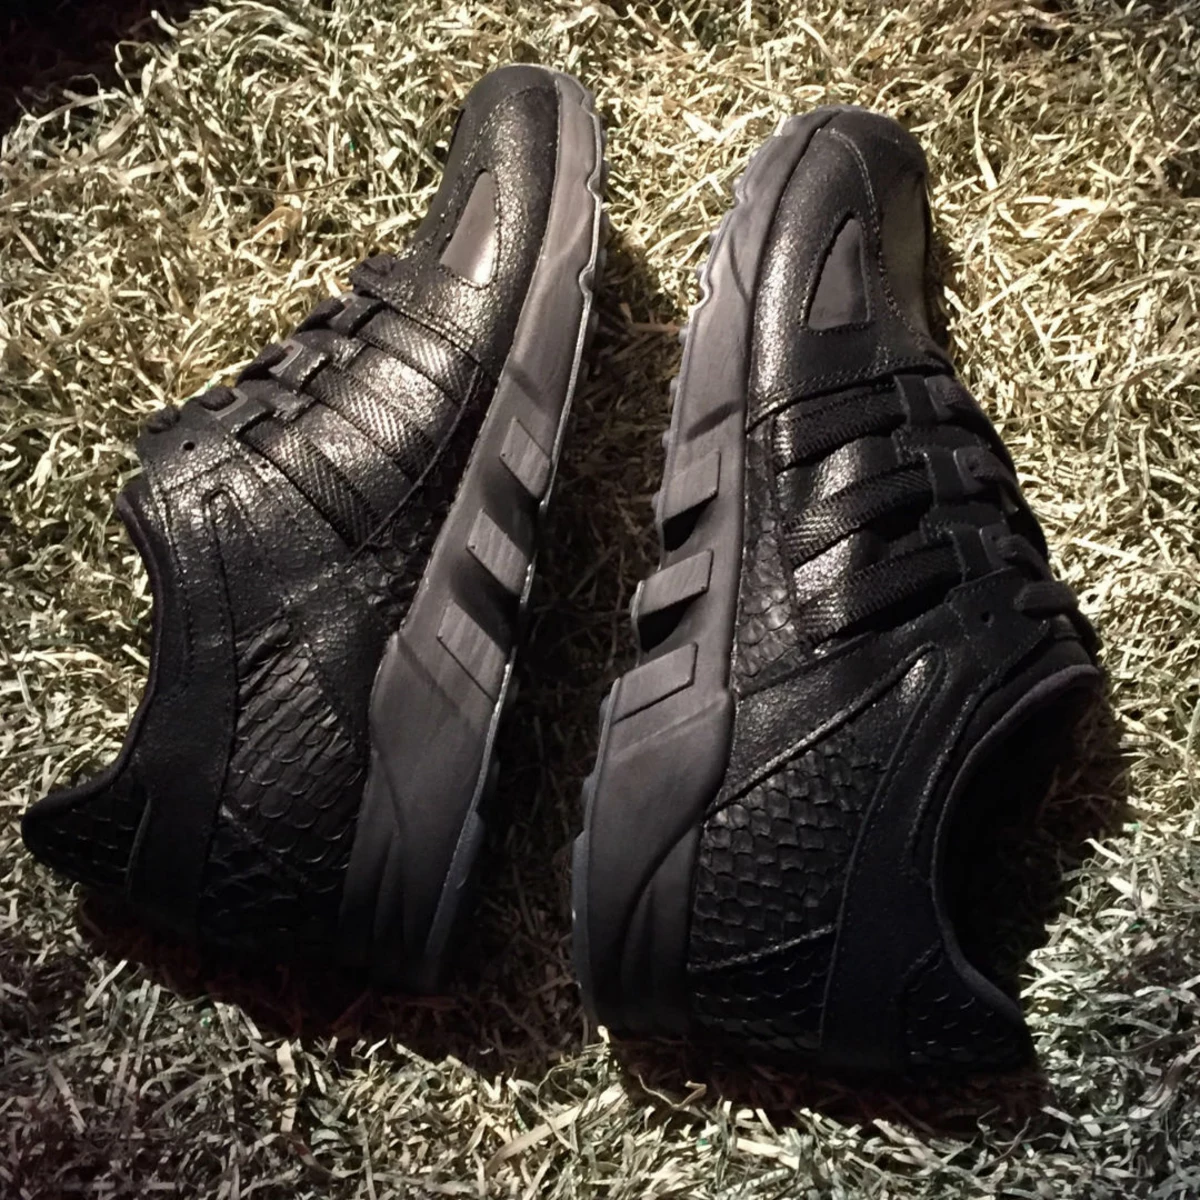 First Look at the Pusha T x adidas EQT Guidance 93 